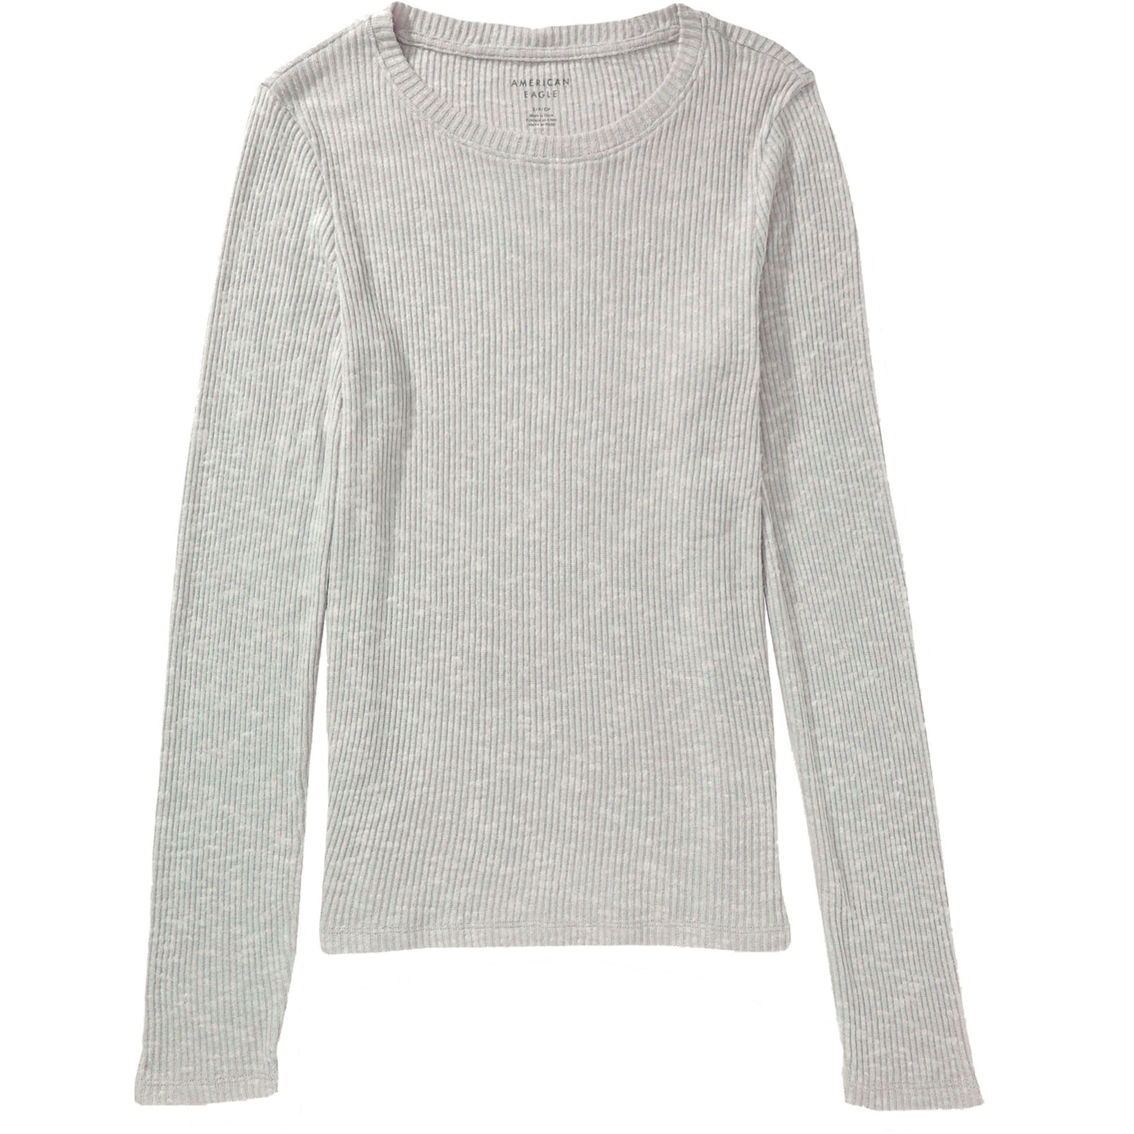 American Eagle Juniors Butter Plush Crew Neck Tee | Tops | Clothing ...